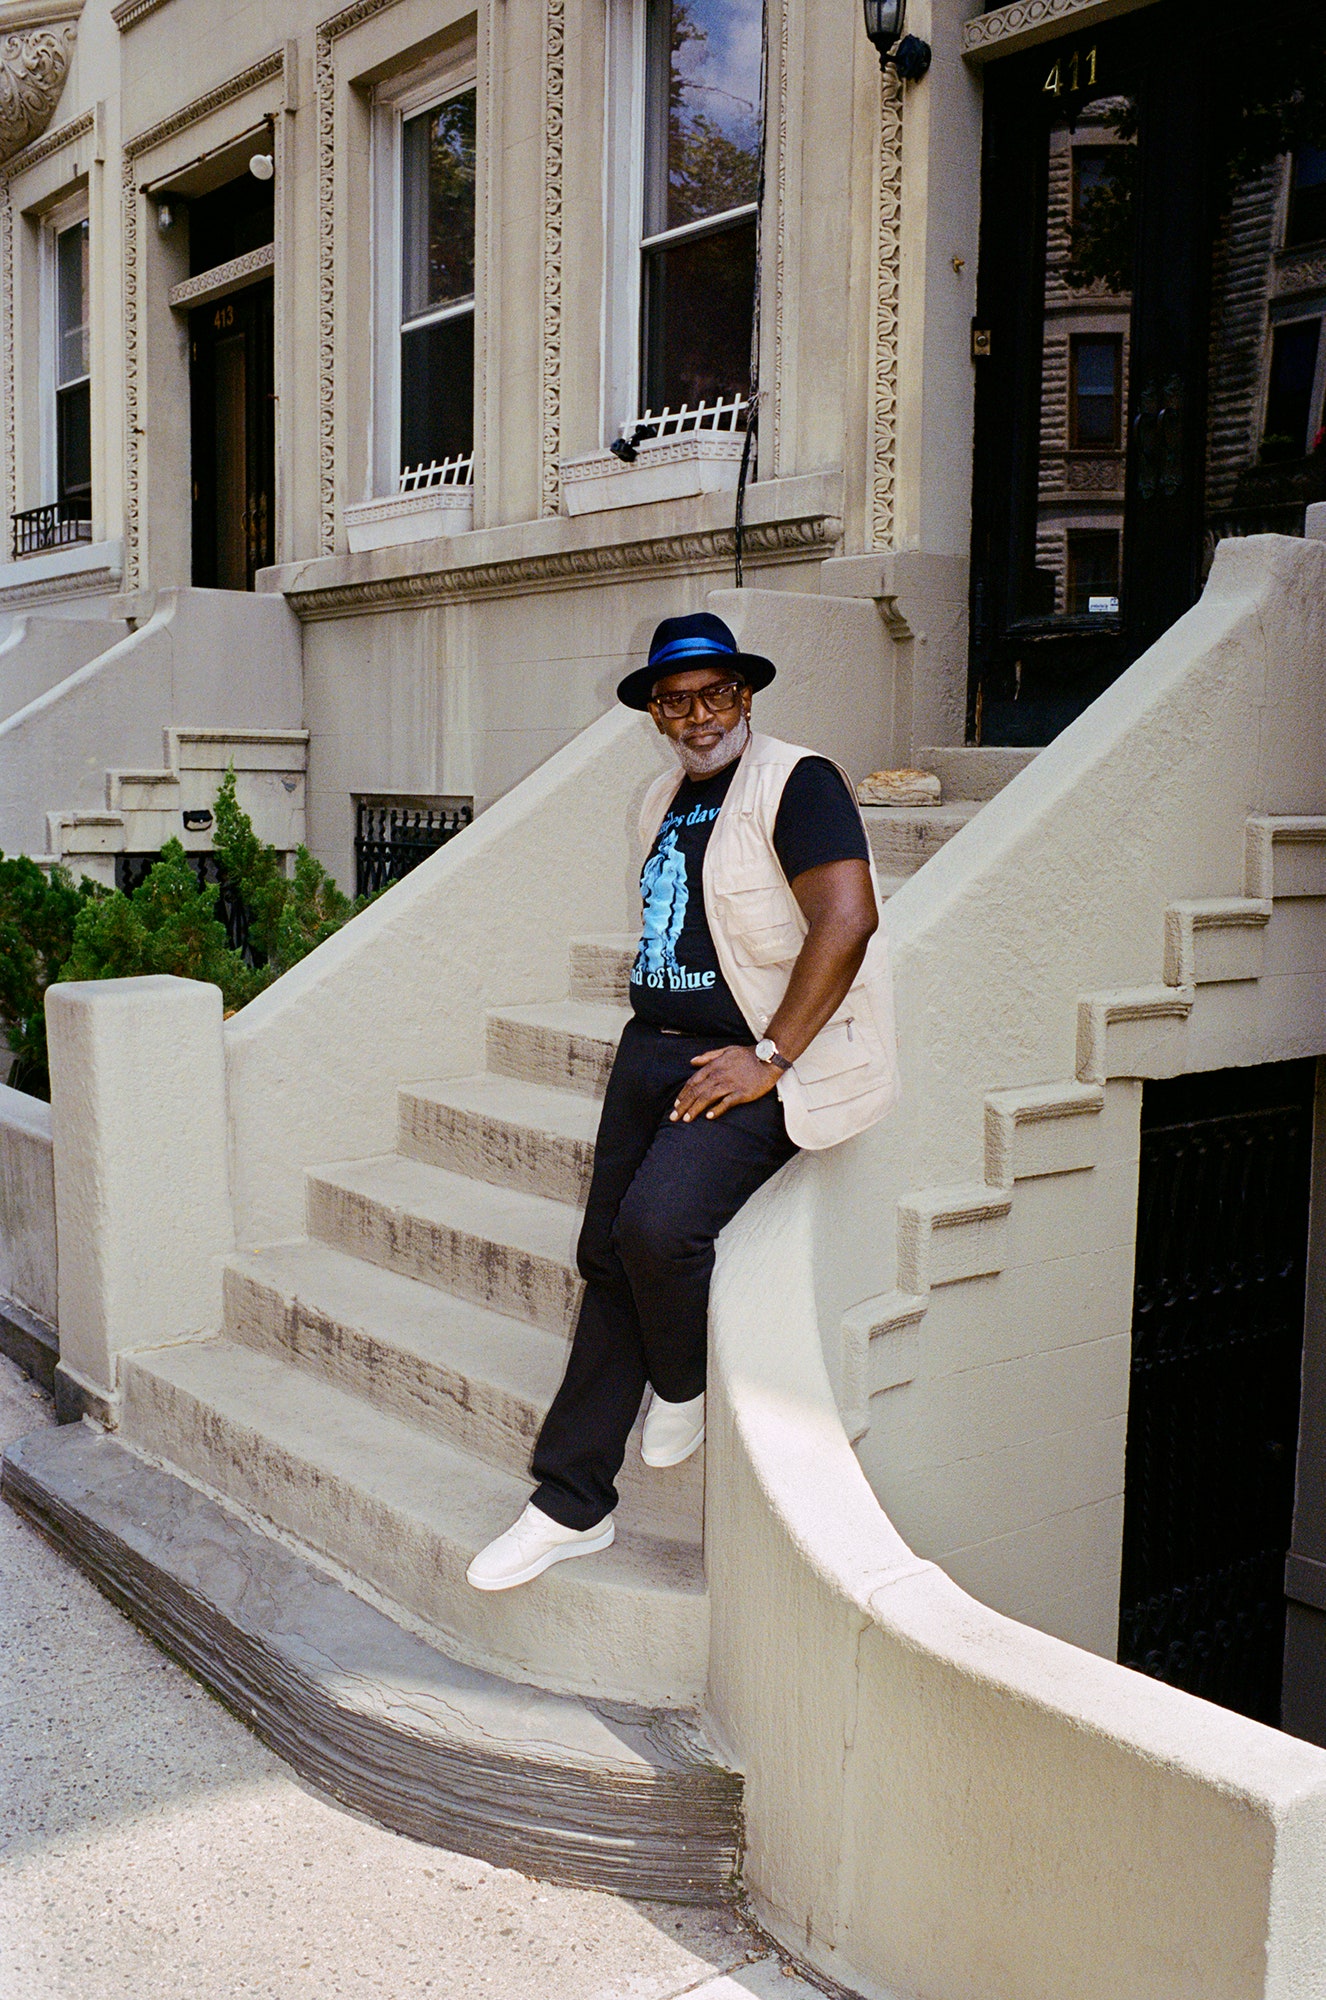 Brathwaite on the steps of his Sugar Hill town house once a hangout for the likes of W.E.B. Du Bois and Billie Holiday....